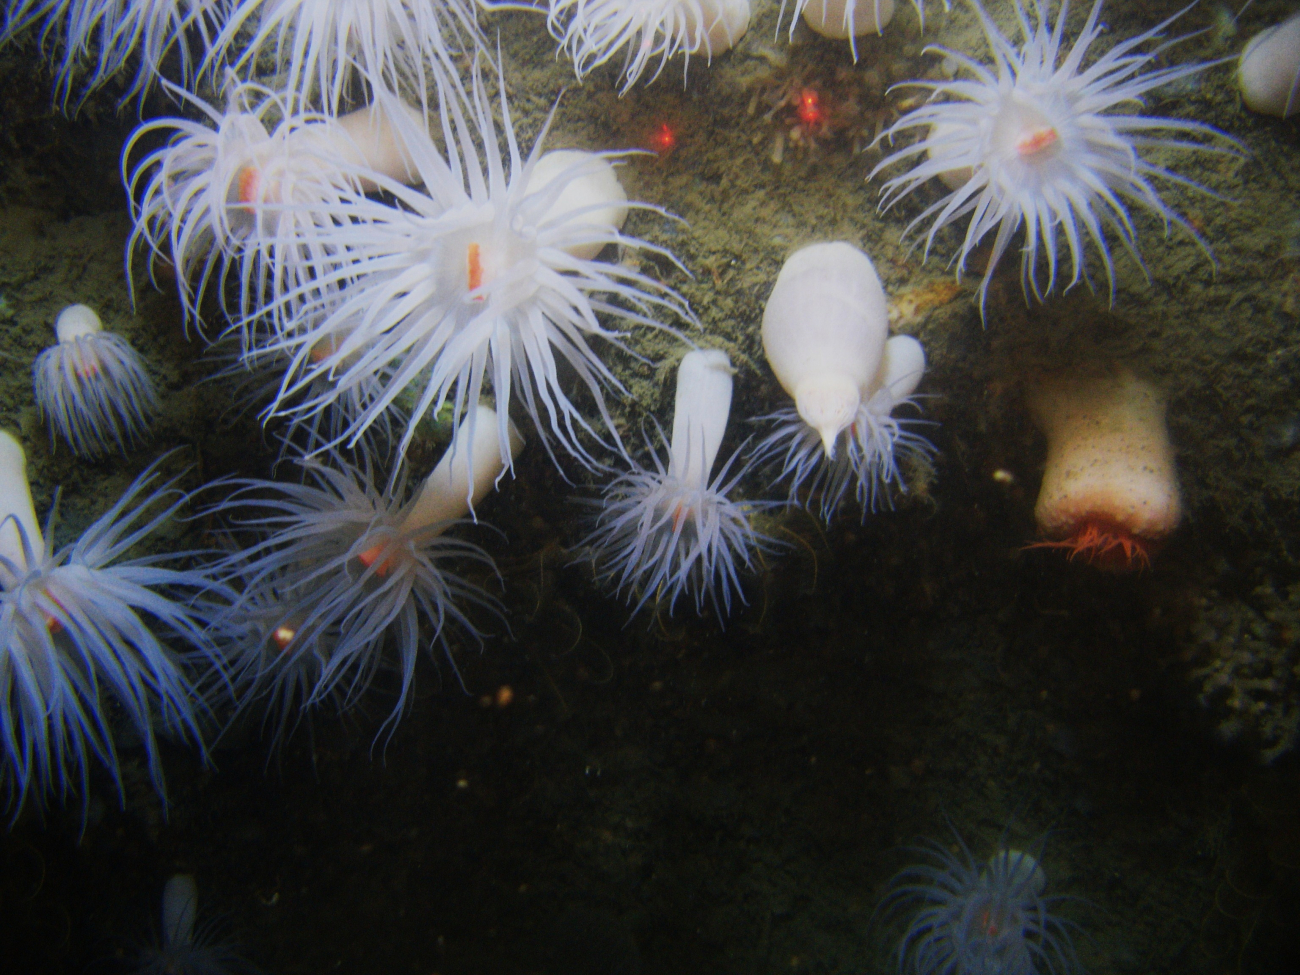 Looking down on large white anemones with orange mouths